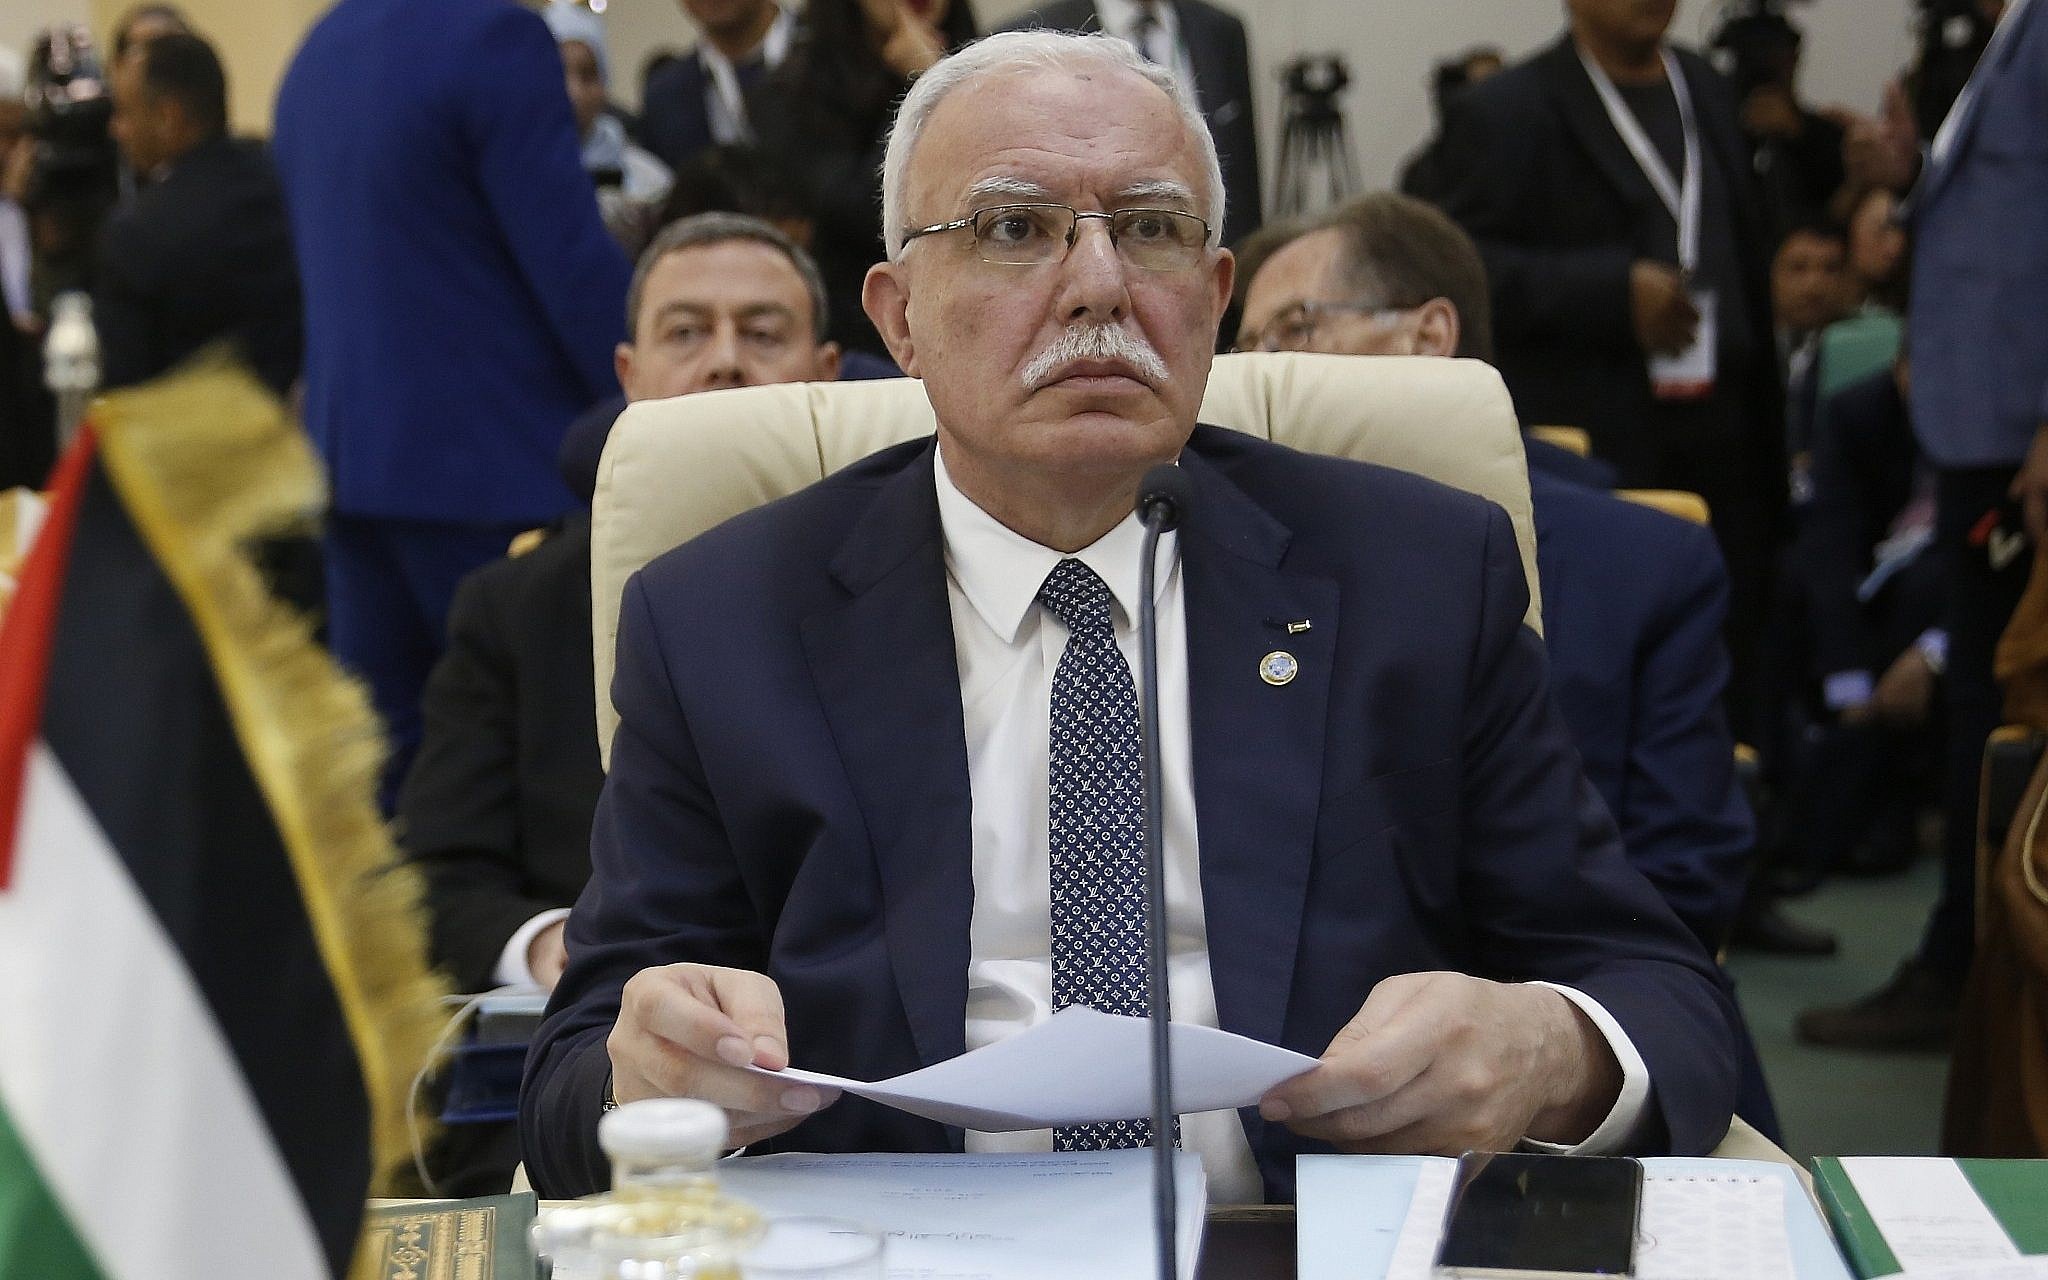 Palestinian Authority Foreign Minister Riyad al-Maliki attends the opening session of the Arab foreign ministers meeting ahead of the Arab Summit, in Tunis, March 29, 2019. (AP Photo/Hussein Malla)